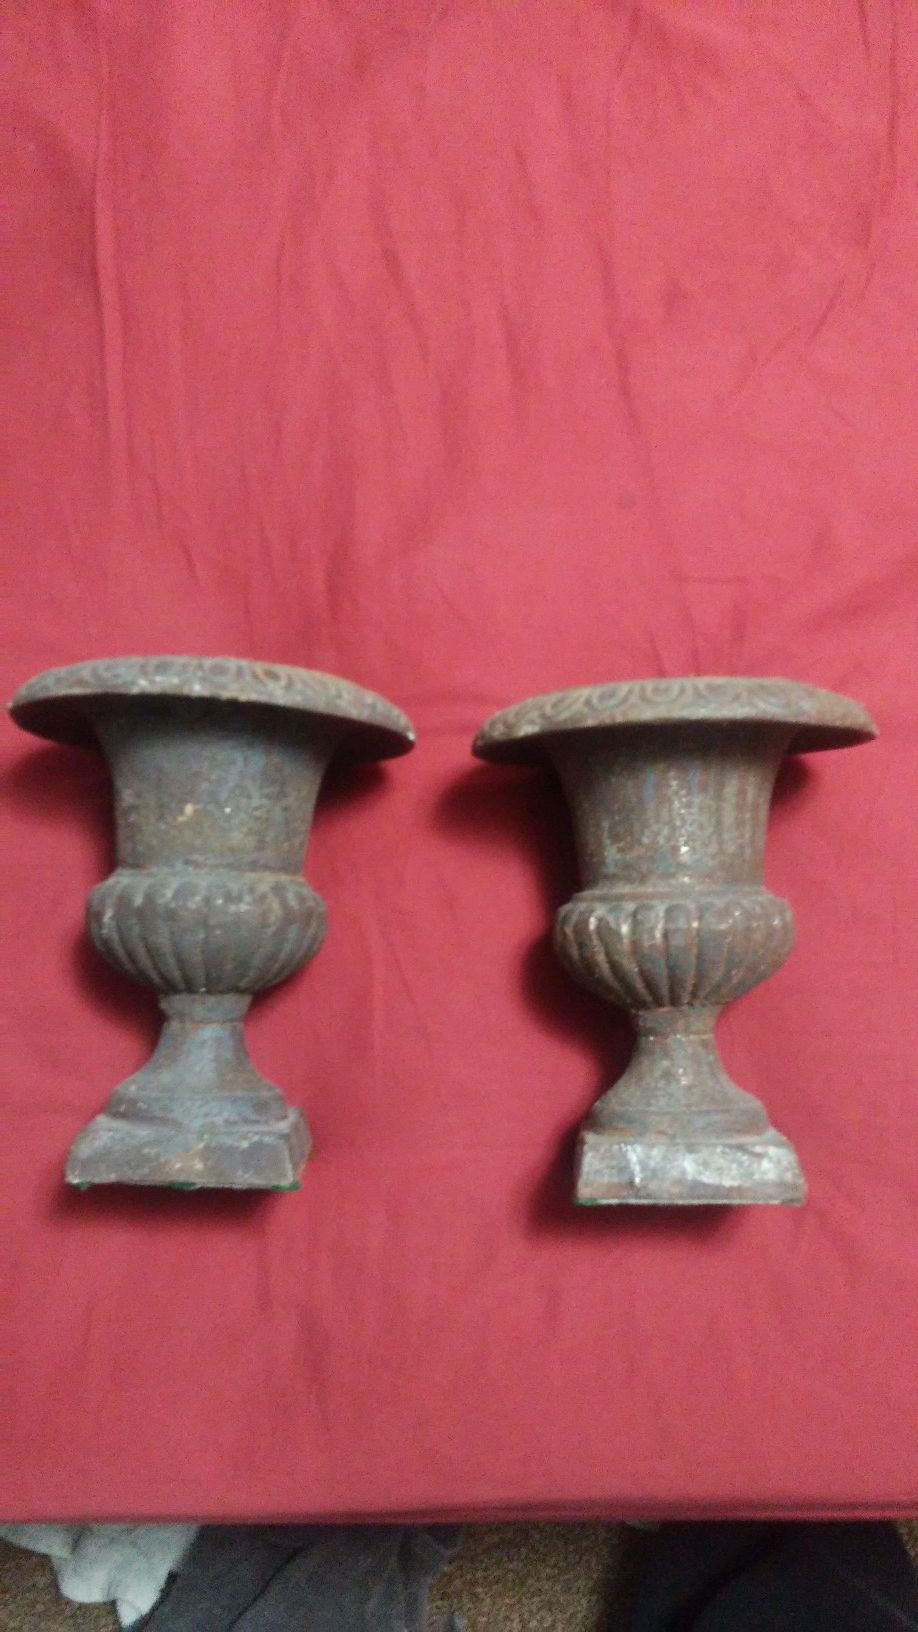 Planters or candle holders